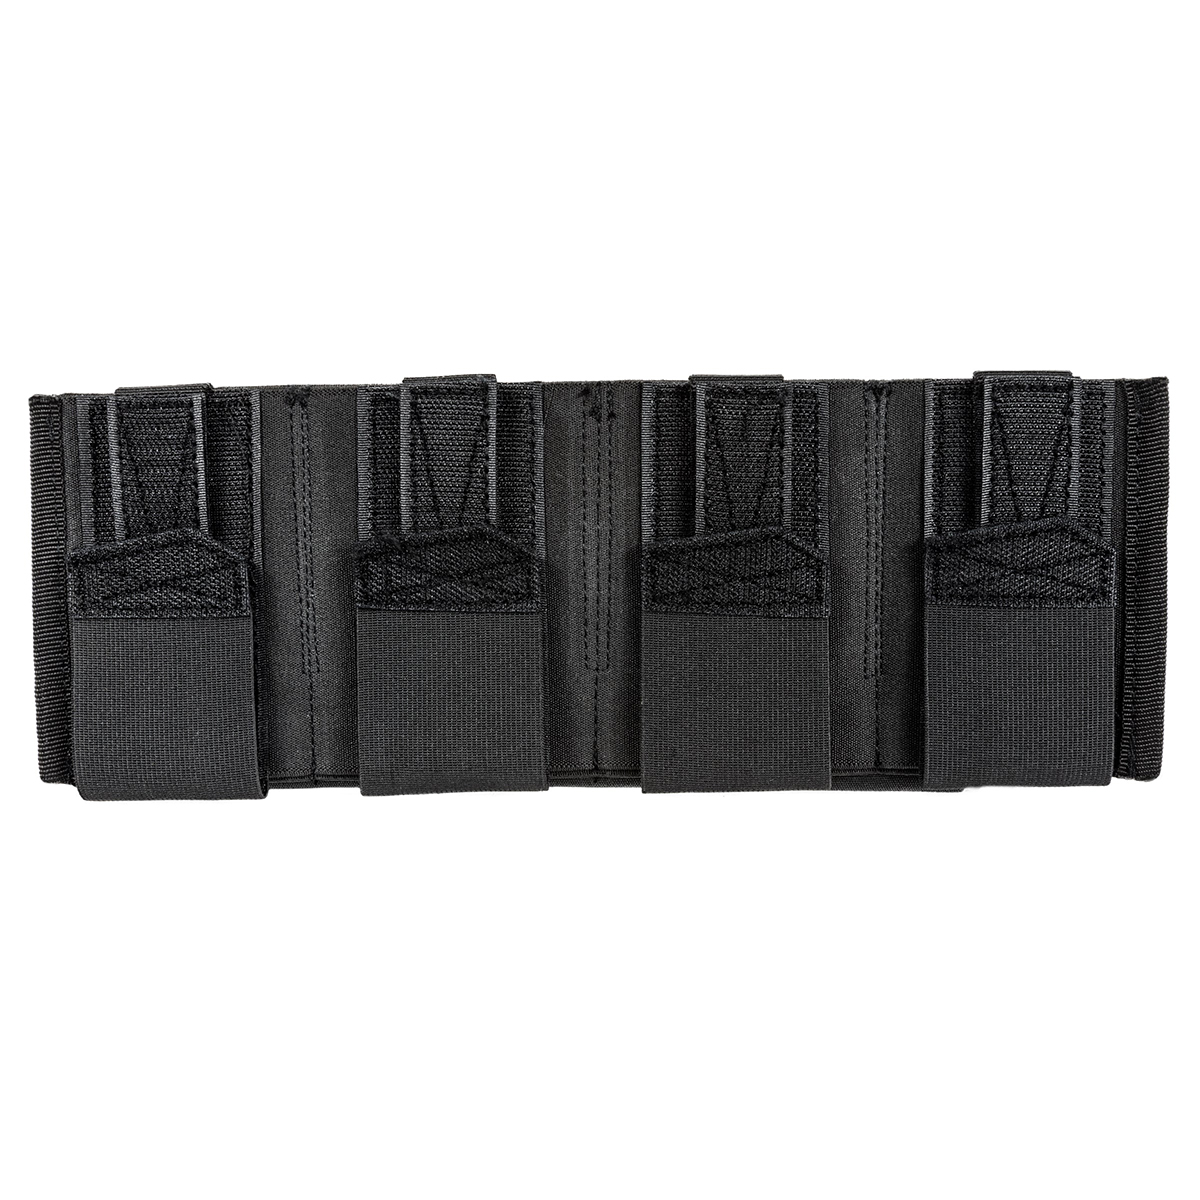 HK Army Rifle Mag Cell (7-Cell) Black